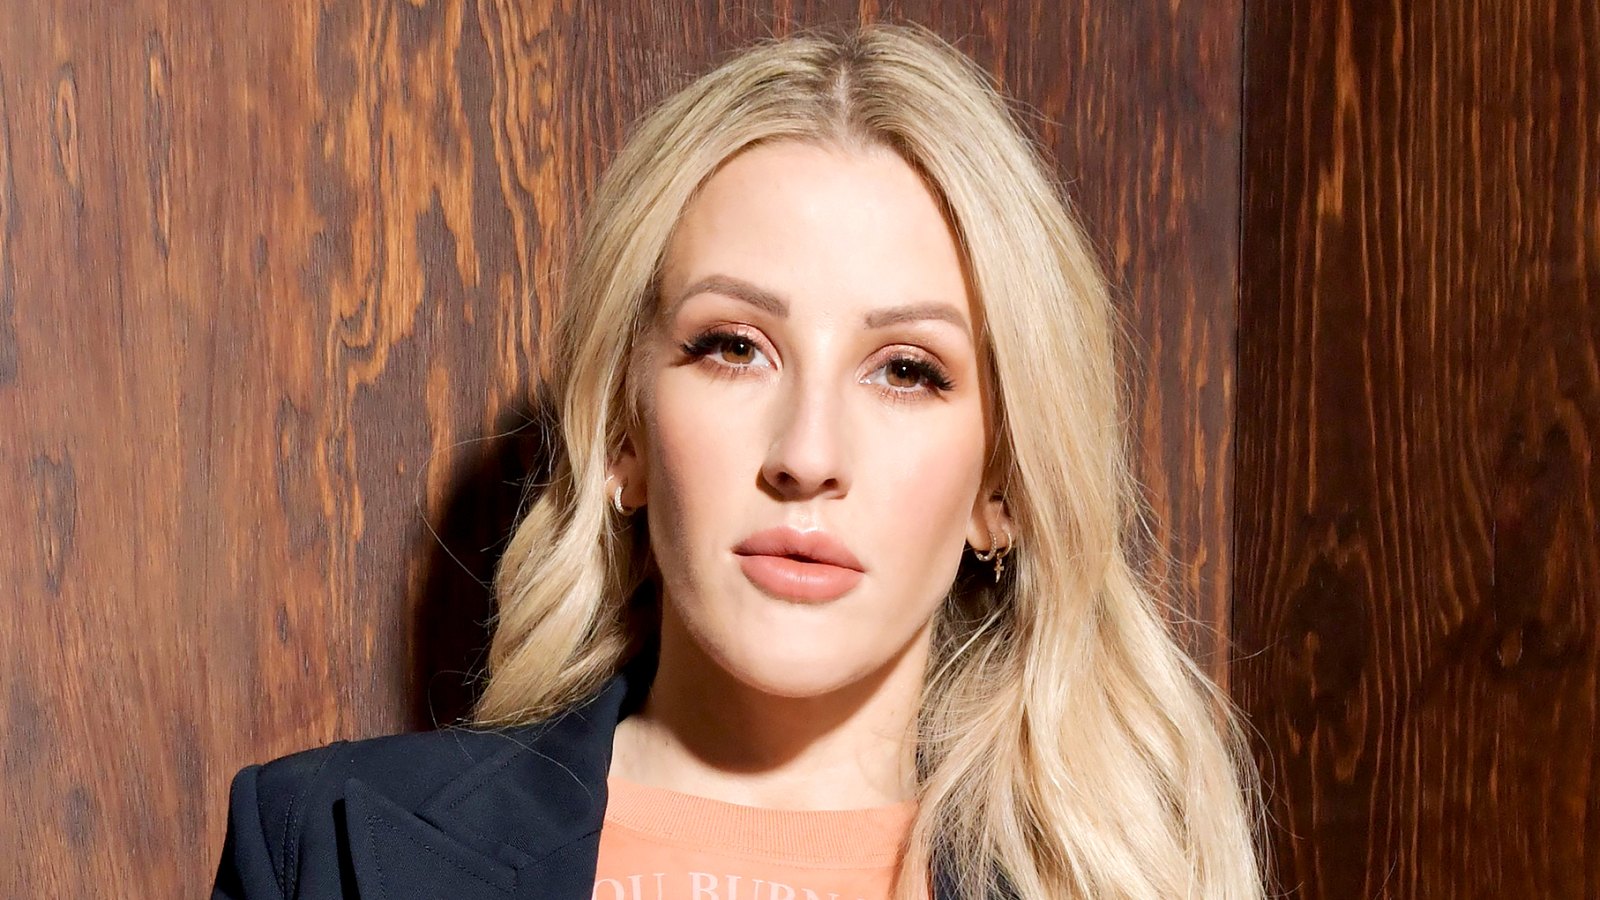 Ellie Goulding Fasts for Up to 40 Hours at a Time